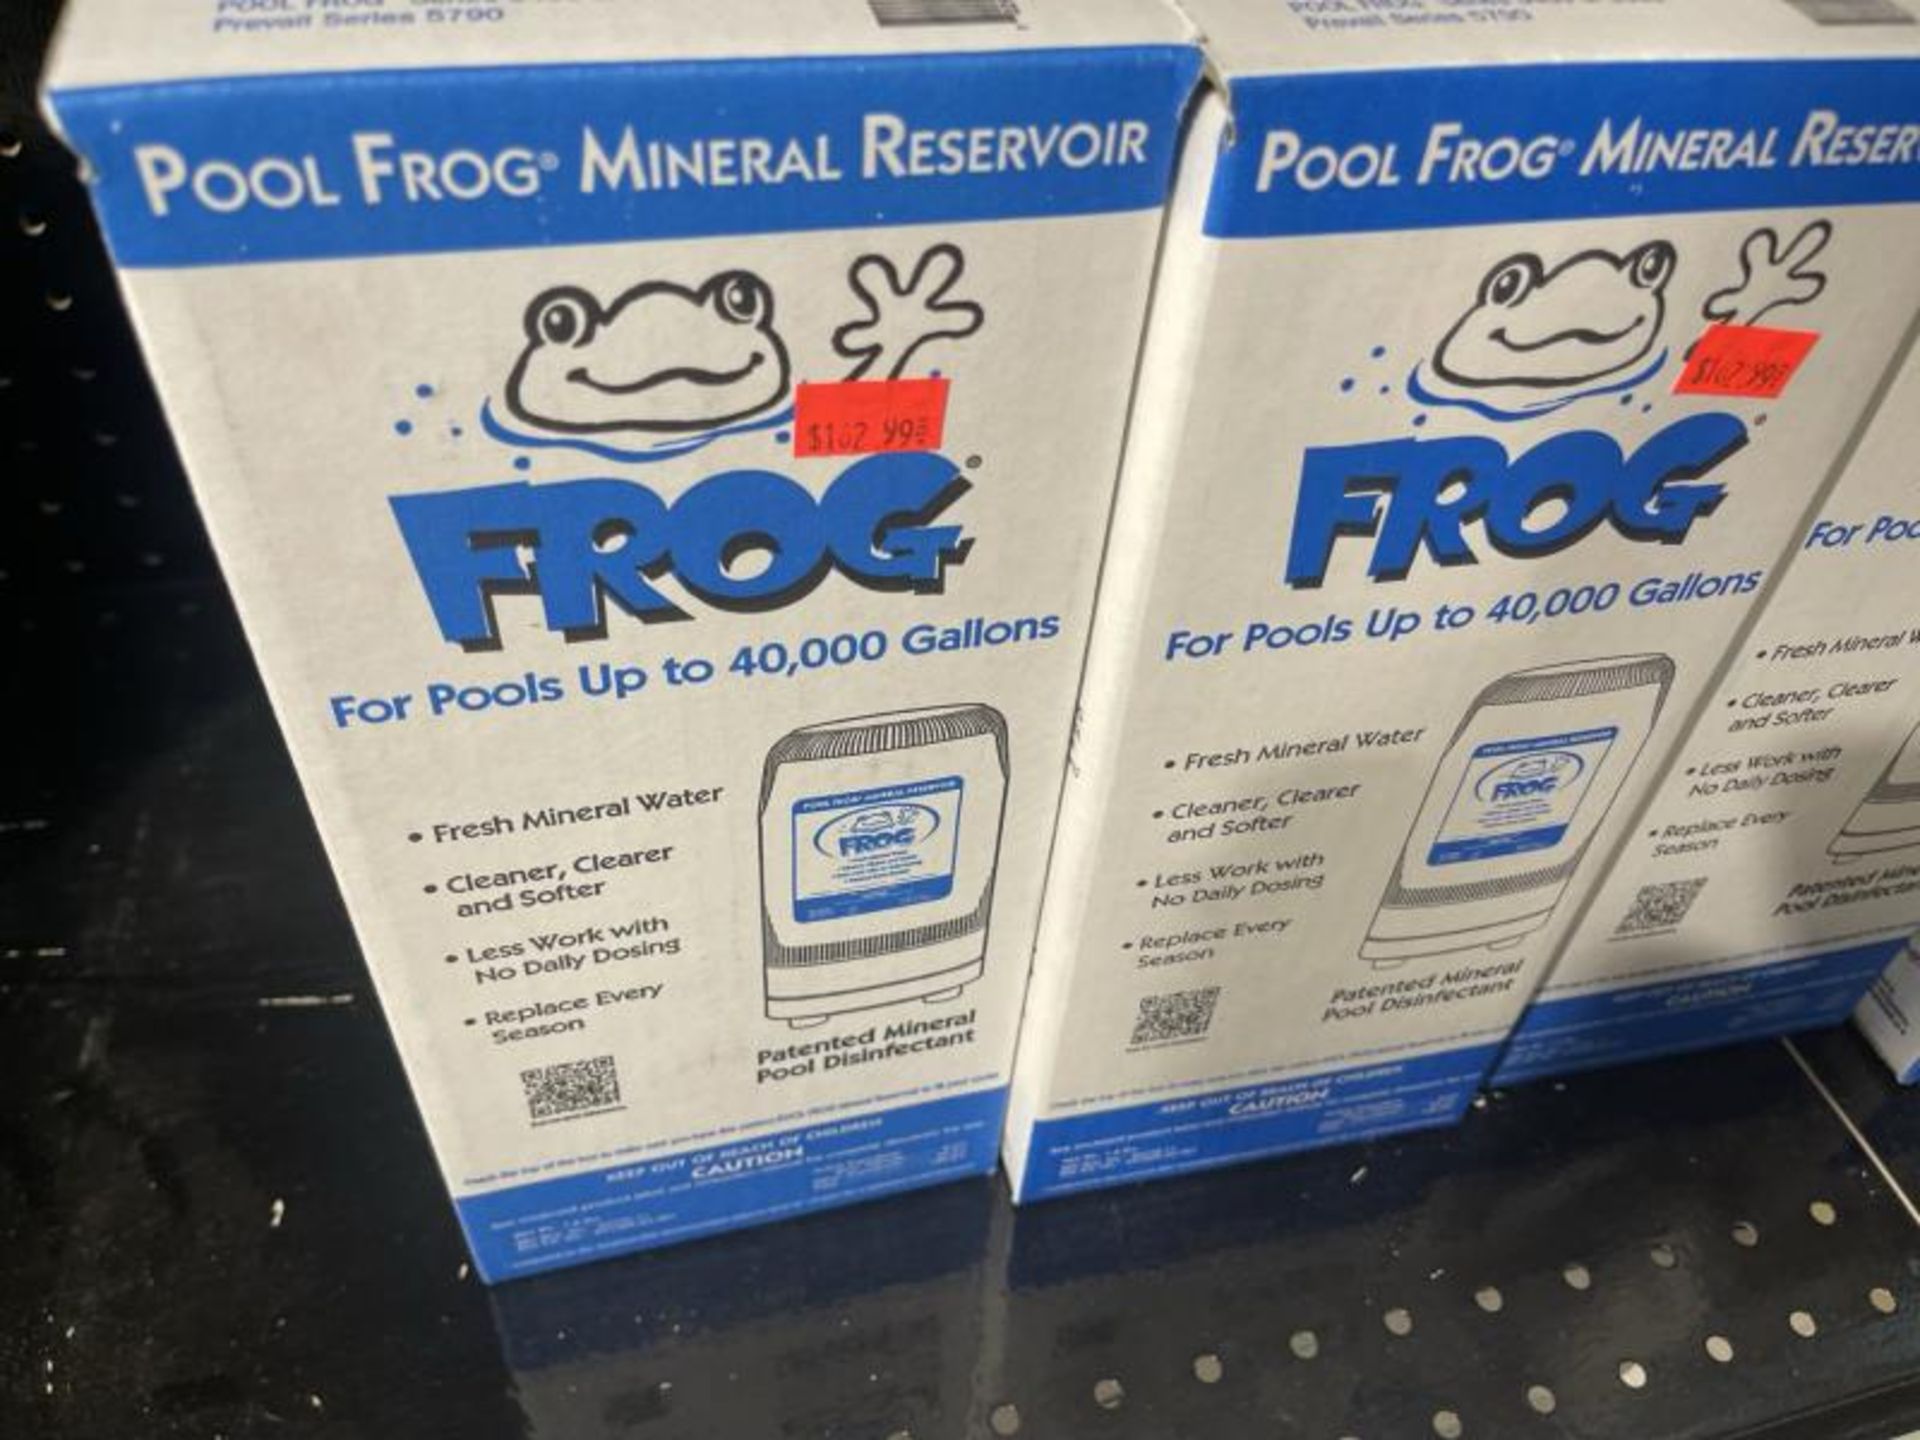 Lot of (4) Pool Frog Mineral Reservoir for Pools up to 40,000 Gallons, Series 5400 - Image 2 of 2